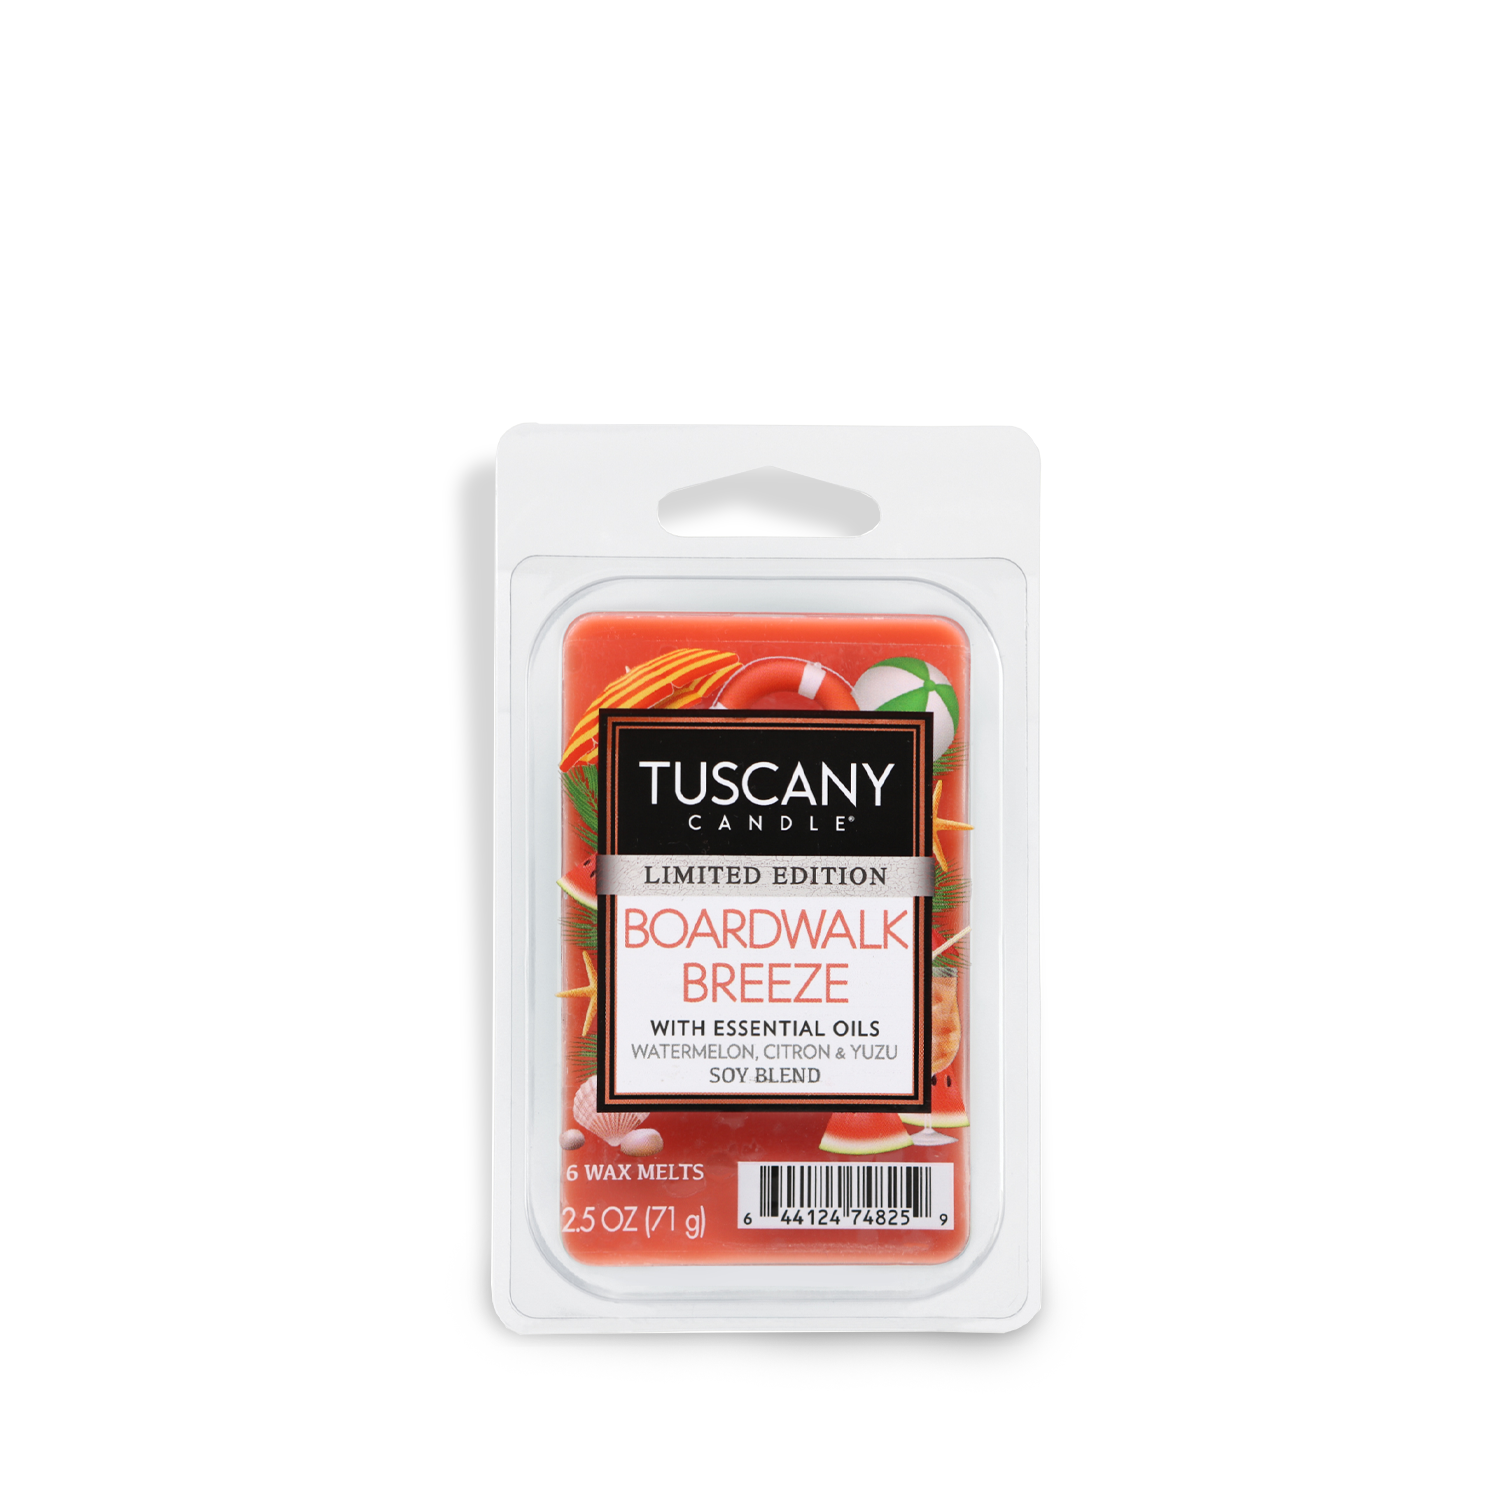 Experience the charm of Tuscany with the Boardwalk Breeze Scented Wax Melt (2.5 oz) from Tuscany Candle® SEASONAL. Transport yourself to a sunny boardwalk as the delightful fragrance fills your space.